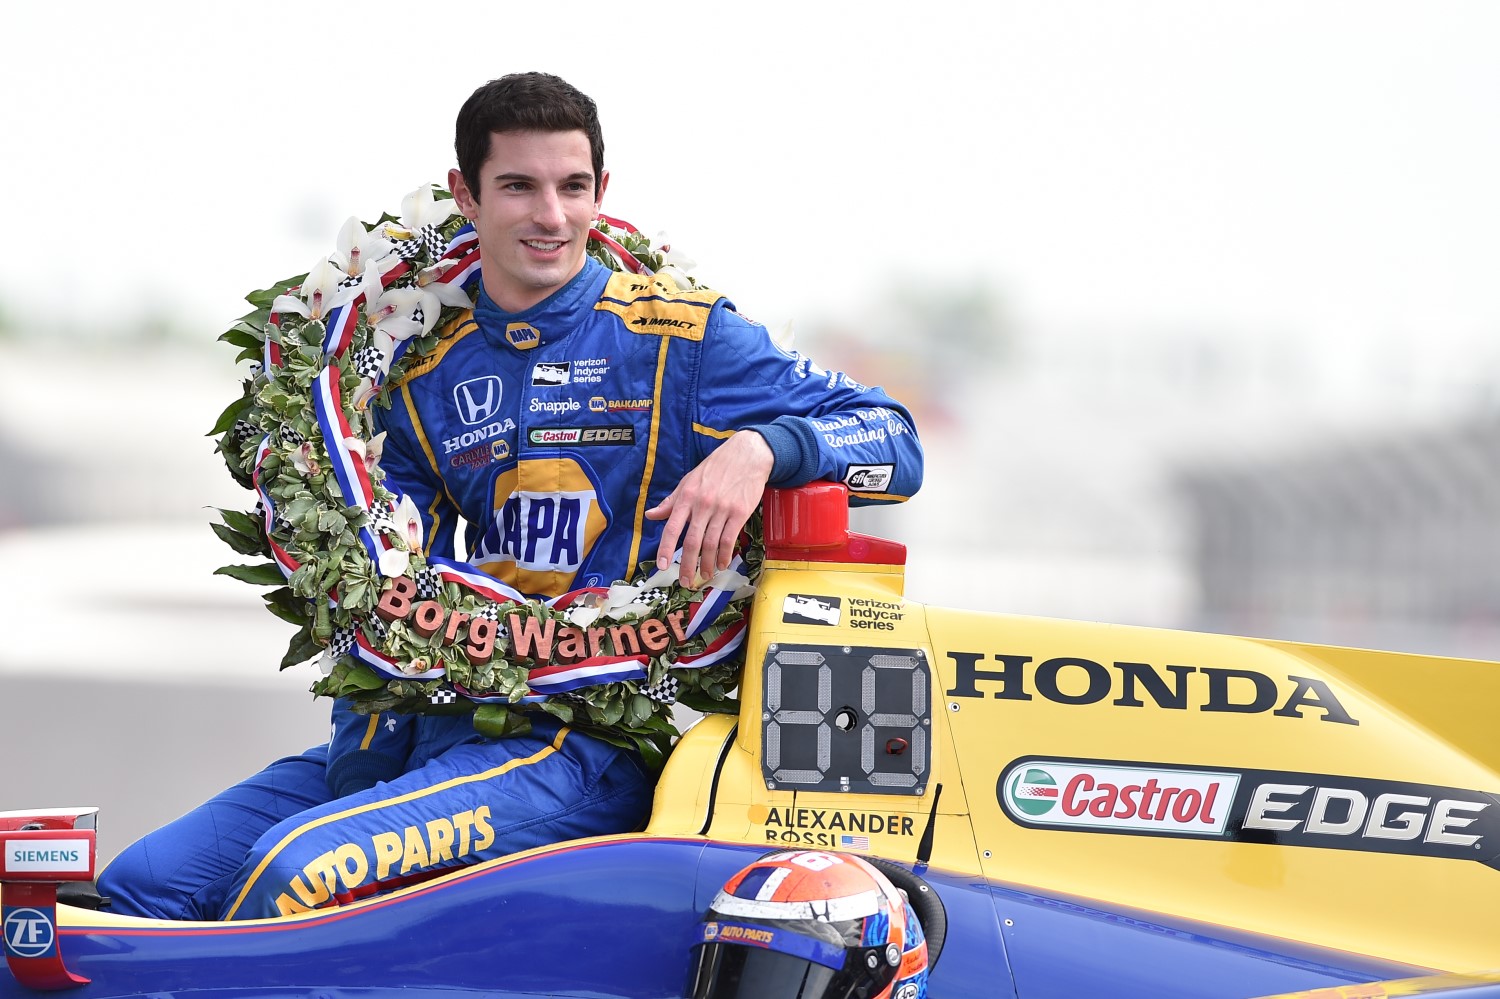 Indy 500 winner Alexander Rossi to test The Glen on Mponday